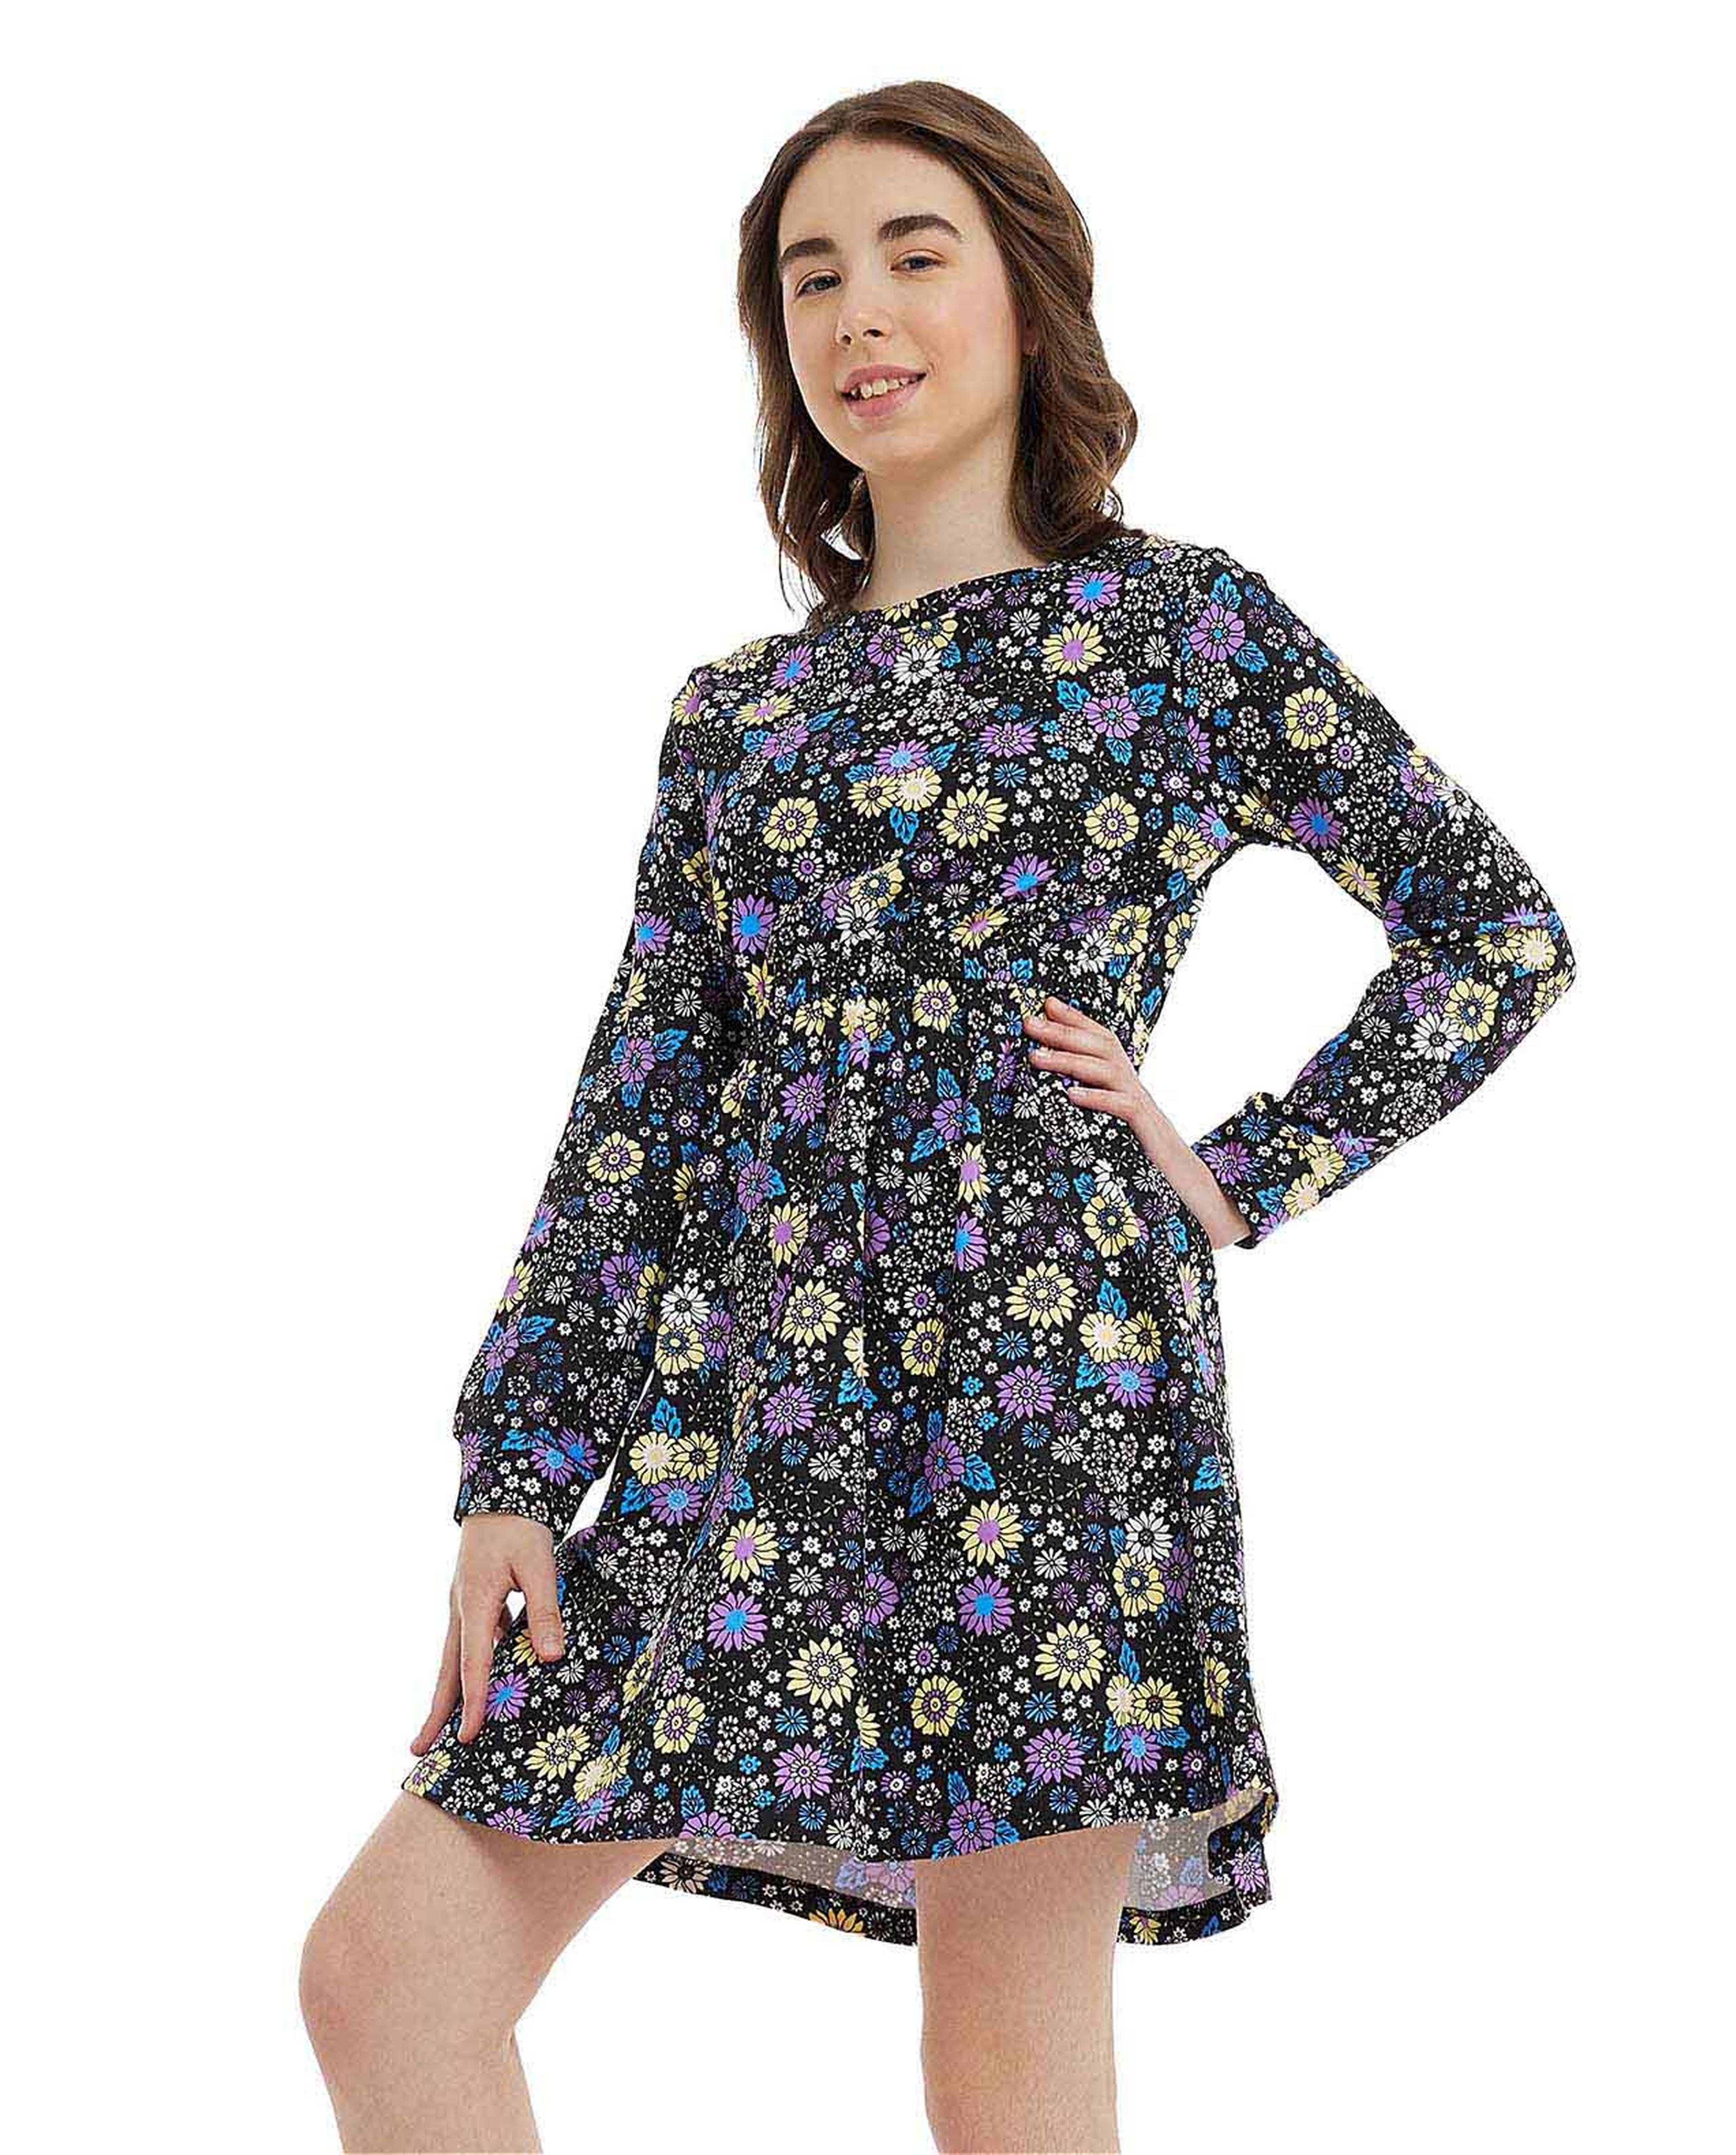 Floral Print Dress with Crew Neck and Long Sleeves